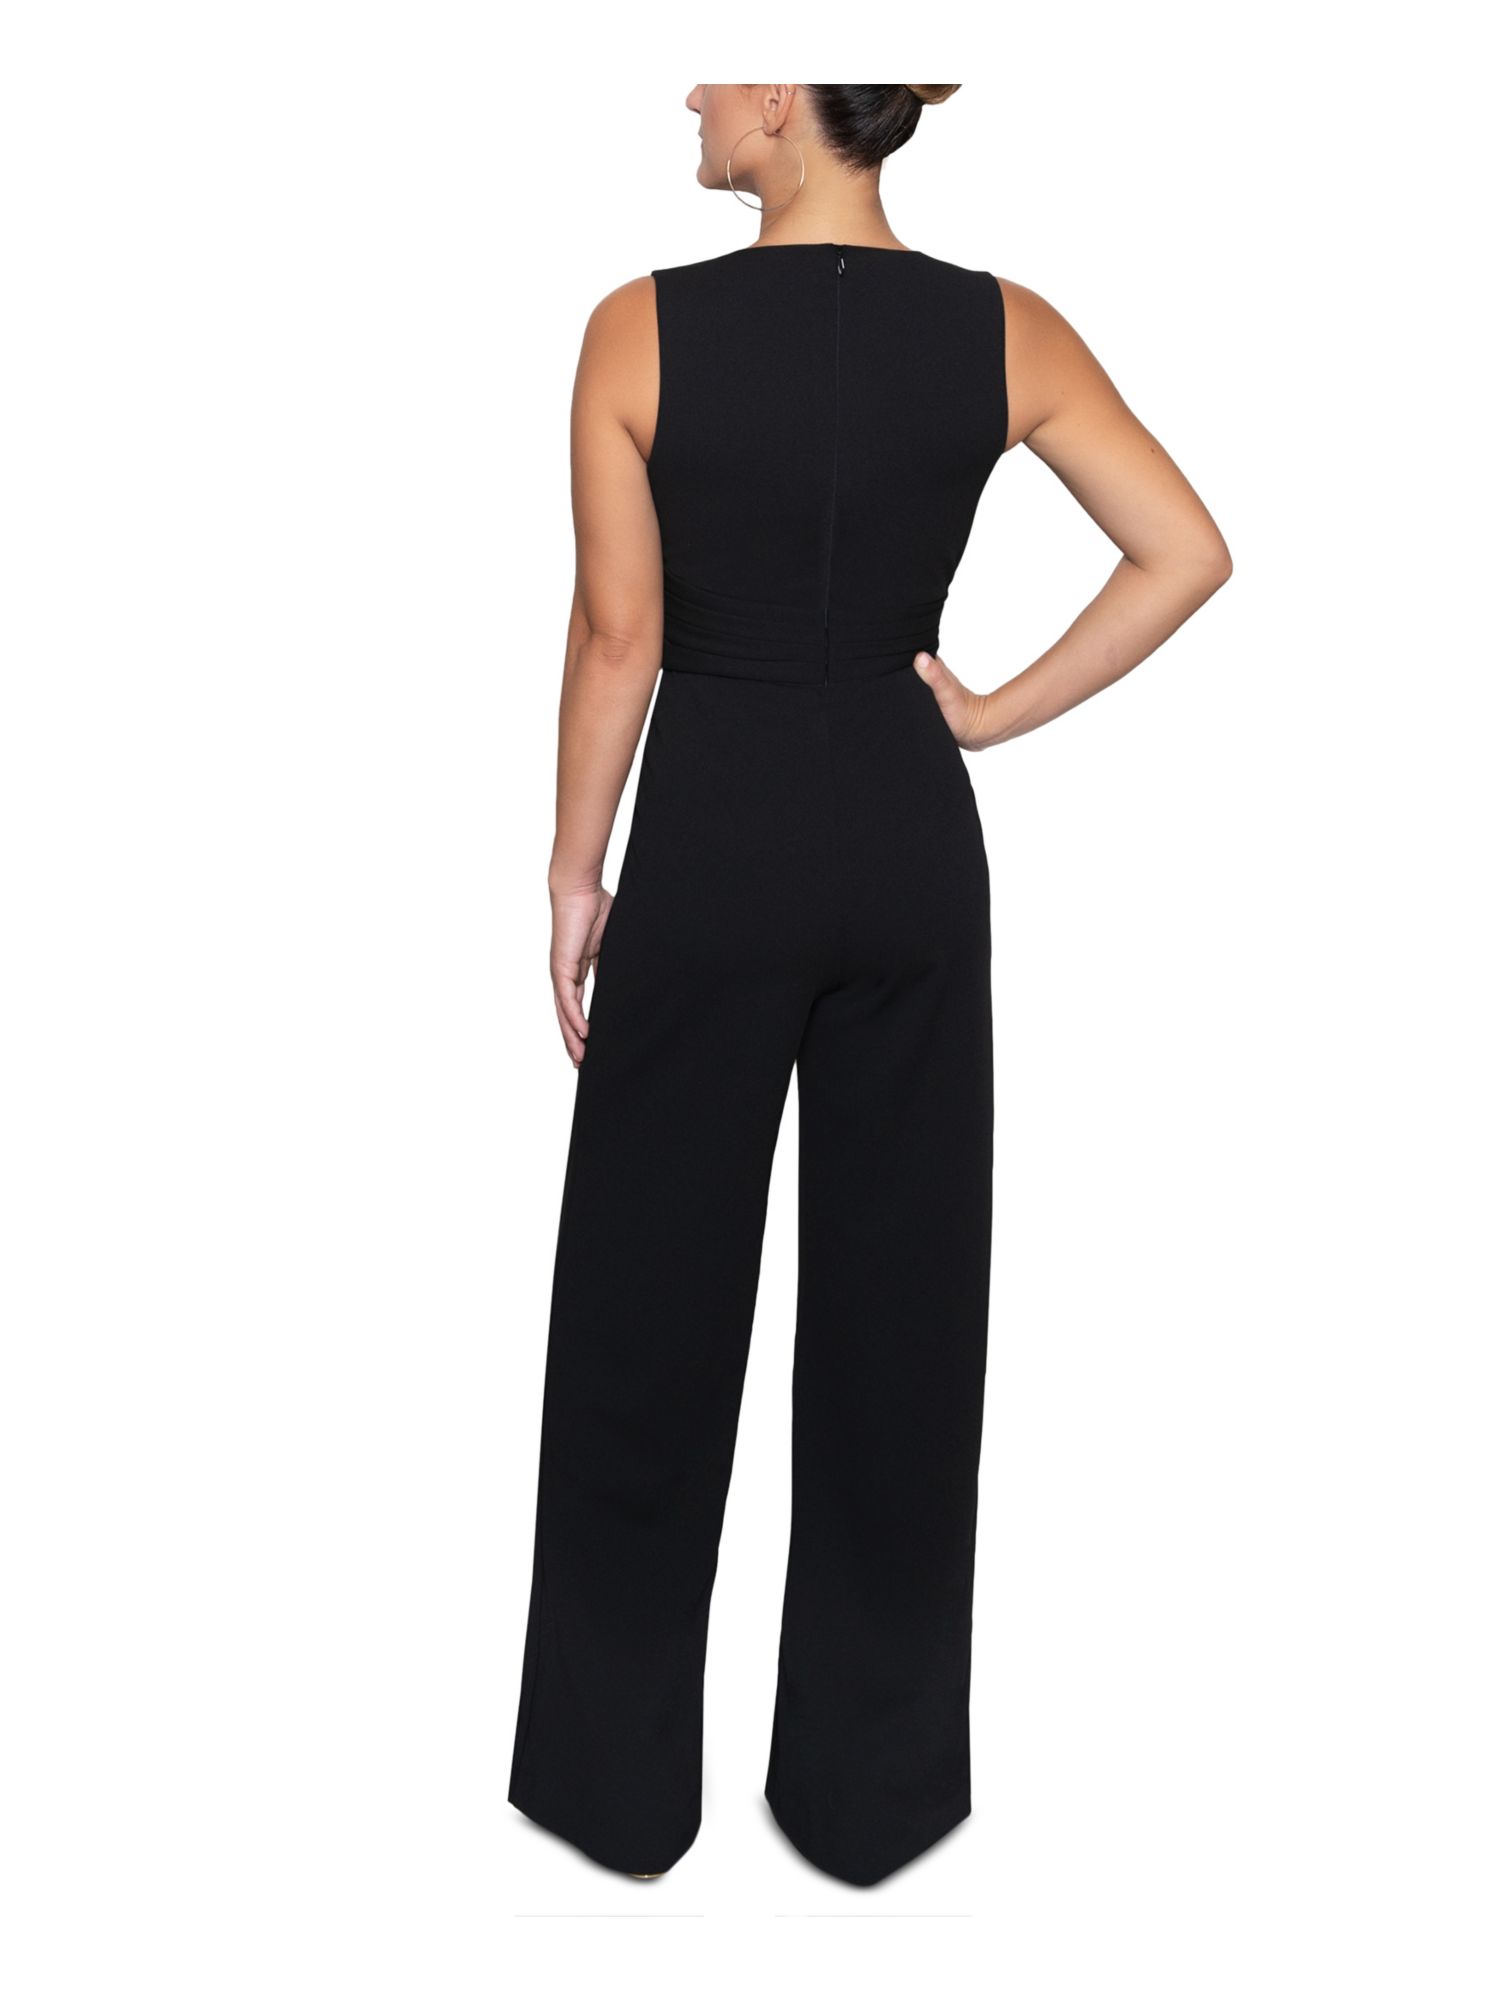 CHRISTIAN SIRIANO Womens Black Belted Sleeveless V Neck Evening Wide Leg Jumpsuit S\P